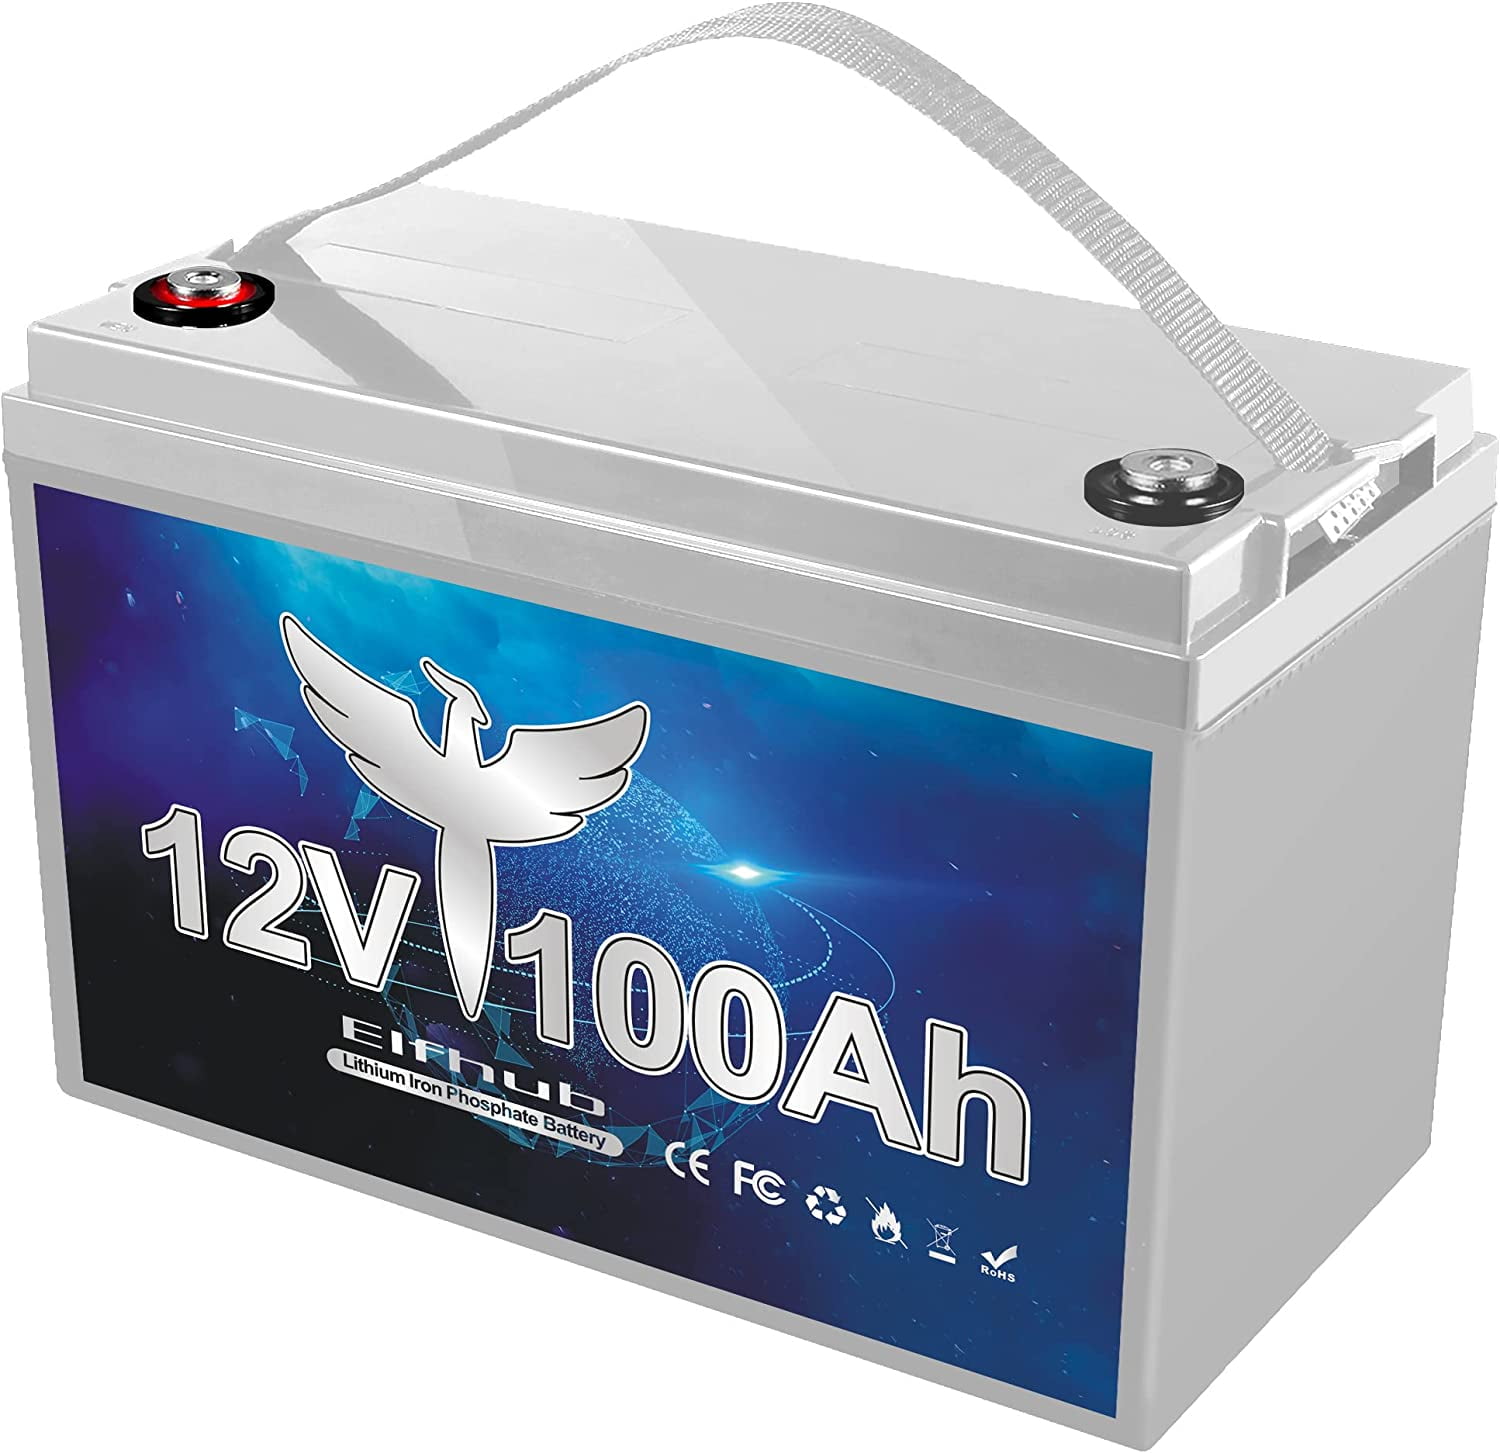 Elfhub 12V 100Ah Lithium Battery, 1280Wh LiFePO4 Battery with 100A BMS,  Over 5000+ Rechargeable Cycles. Perfect for RV/Camper, Solar, Off-Grid,  Boat, Marine, Trolling Motor, Road-Trip.Support 4S/8P 